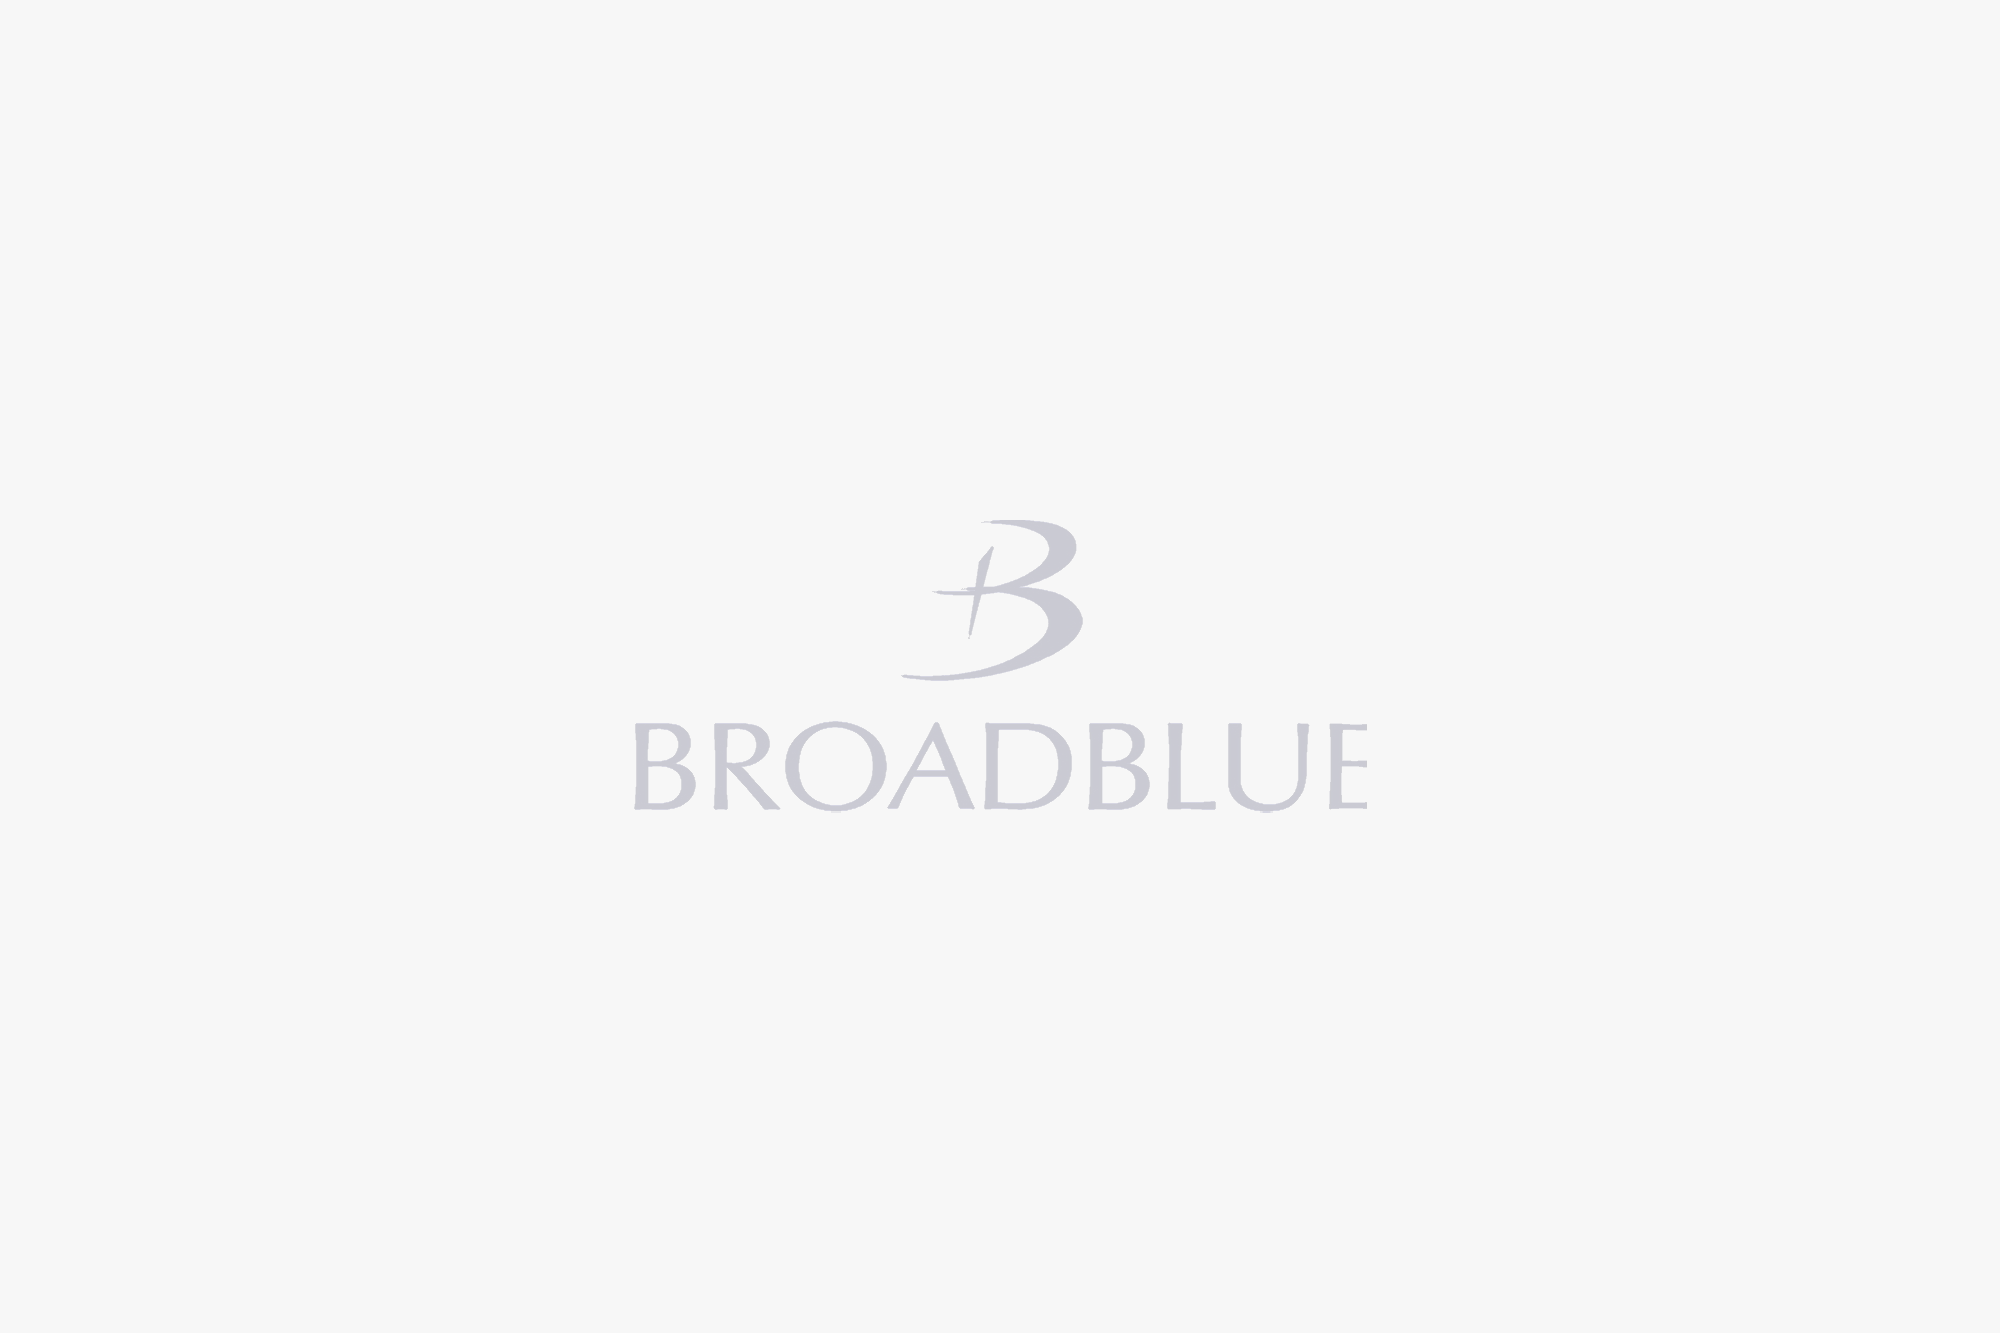 Broadblue announces new update to the ever popular Broadblue 385 - the new series 4